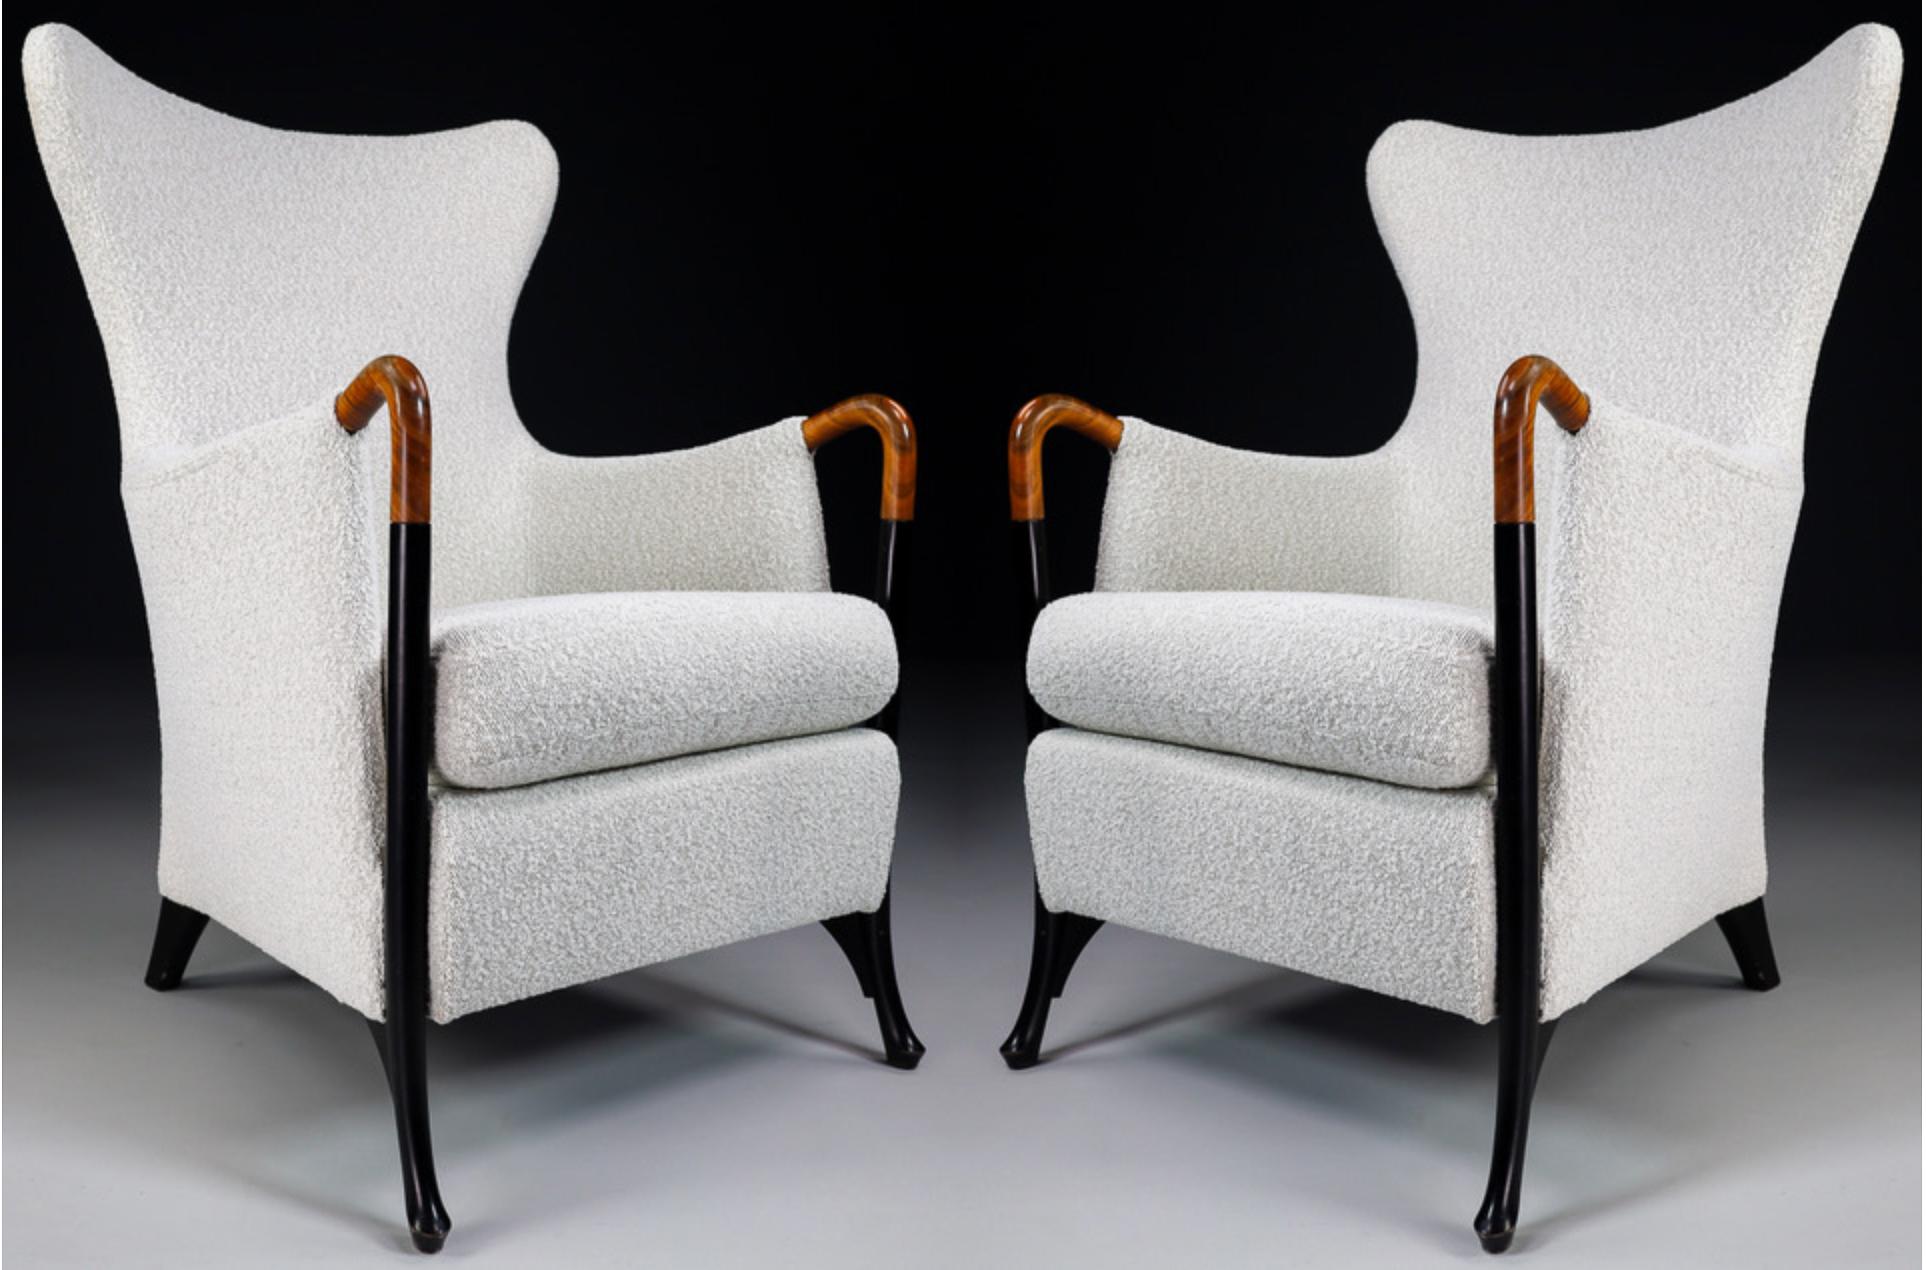 Pair of two Modern Progetti wingback chairs / arm chairs by Umberto Asnago For Giorgetti In New Bouclé Wool Fabric. Stylish and very comfortable chair and elegant curved wooden legs. The structure is in very good condition. These wingback chairs has